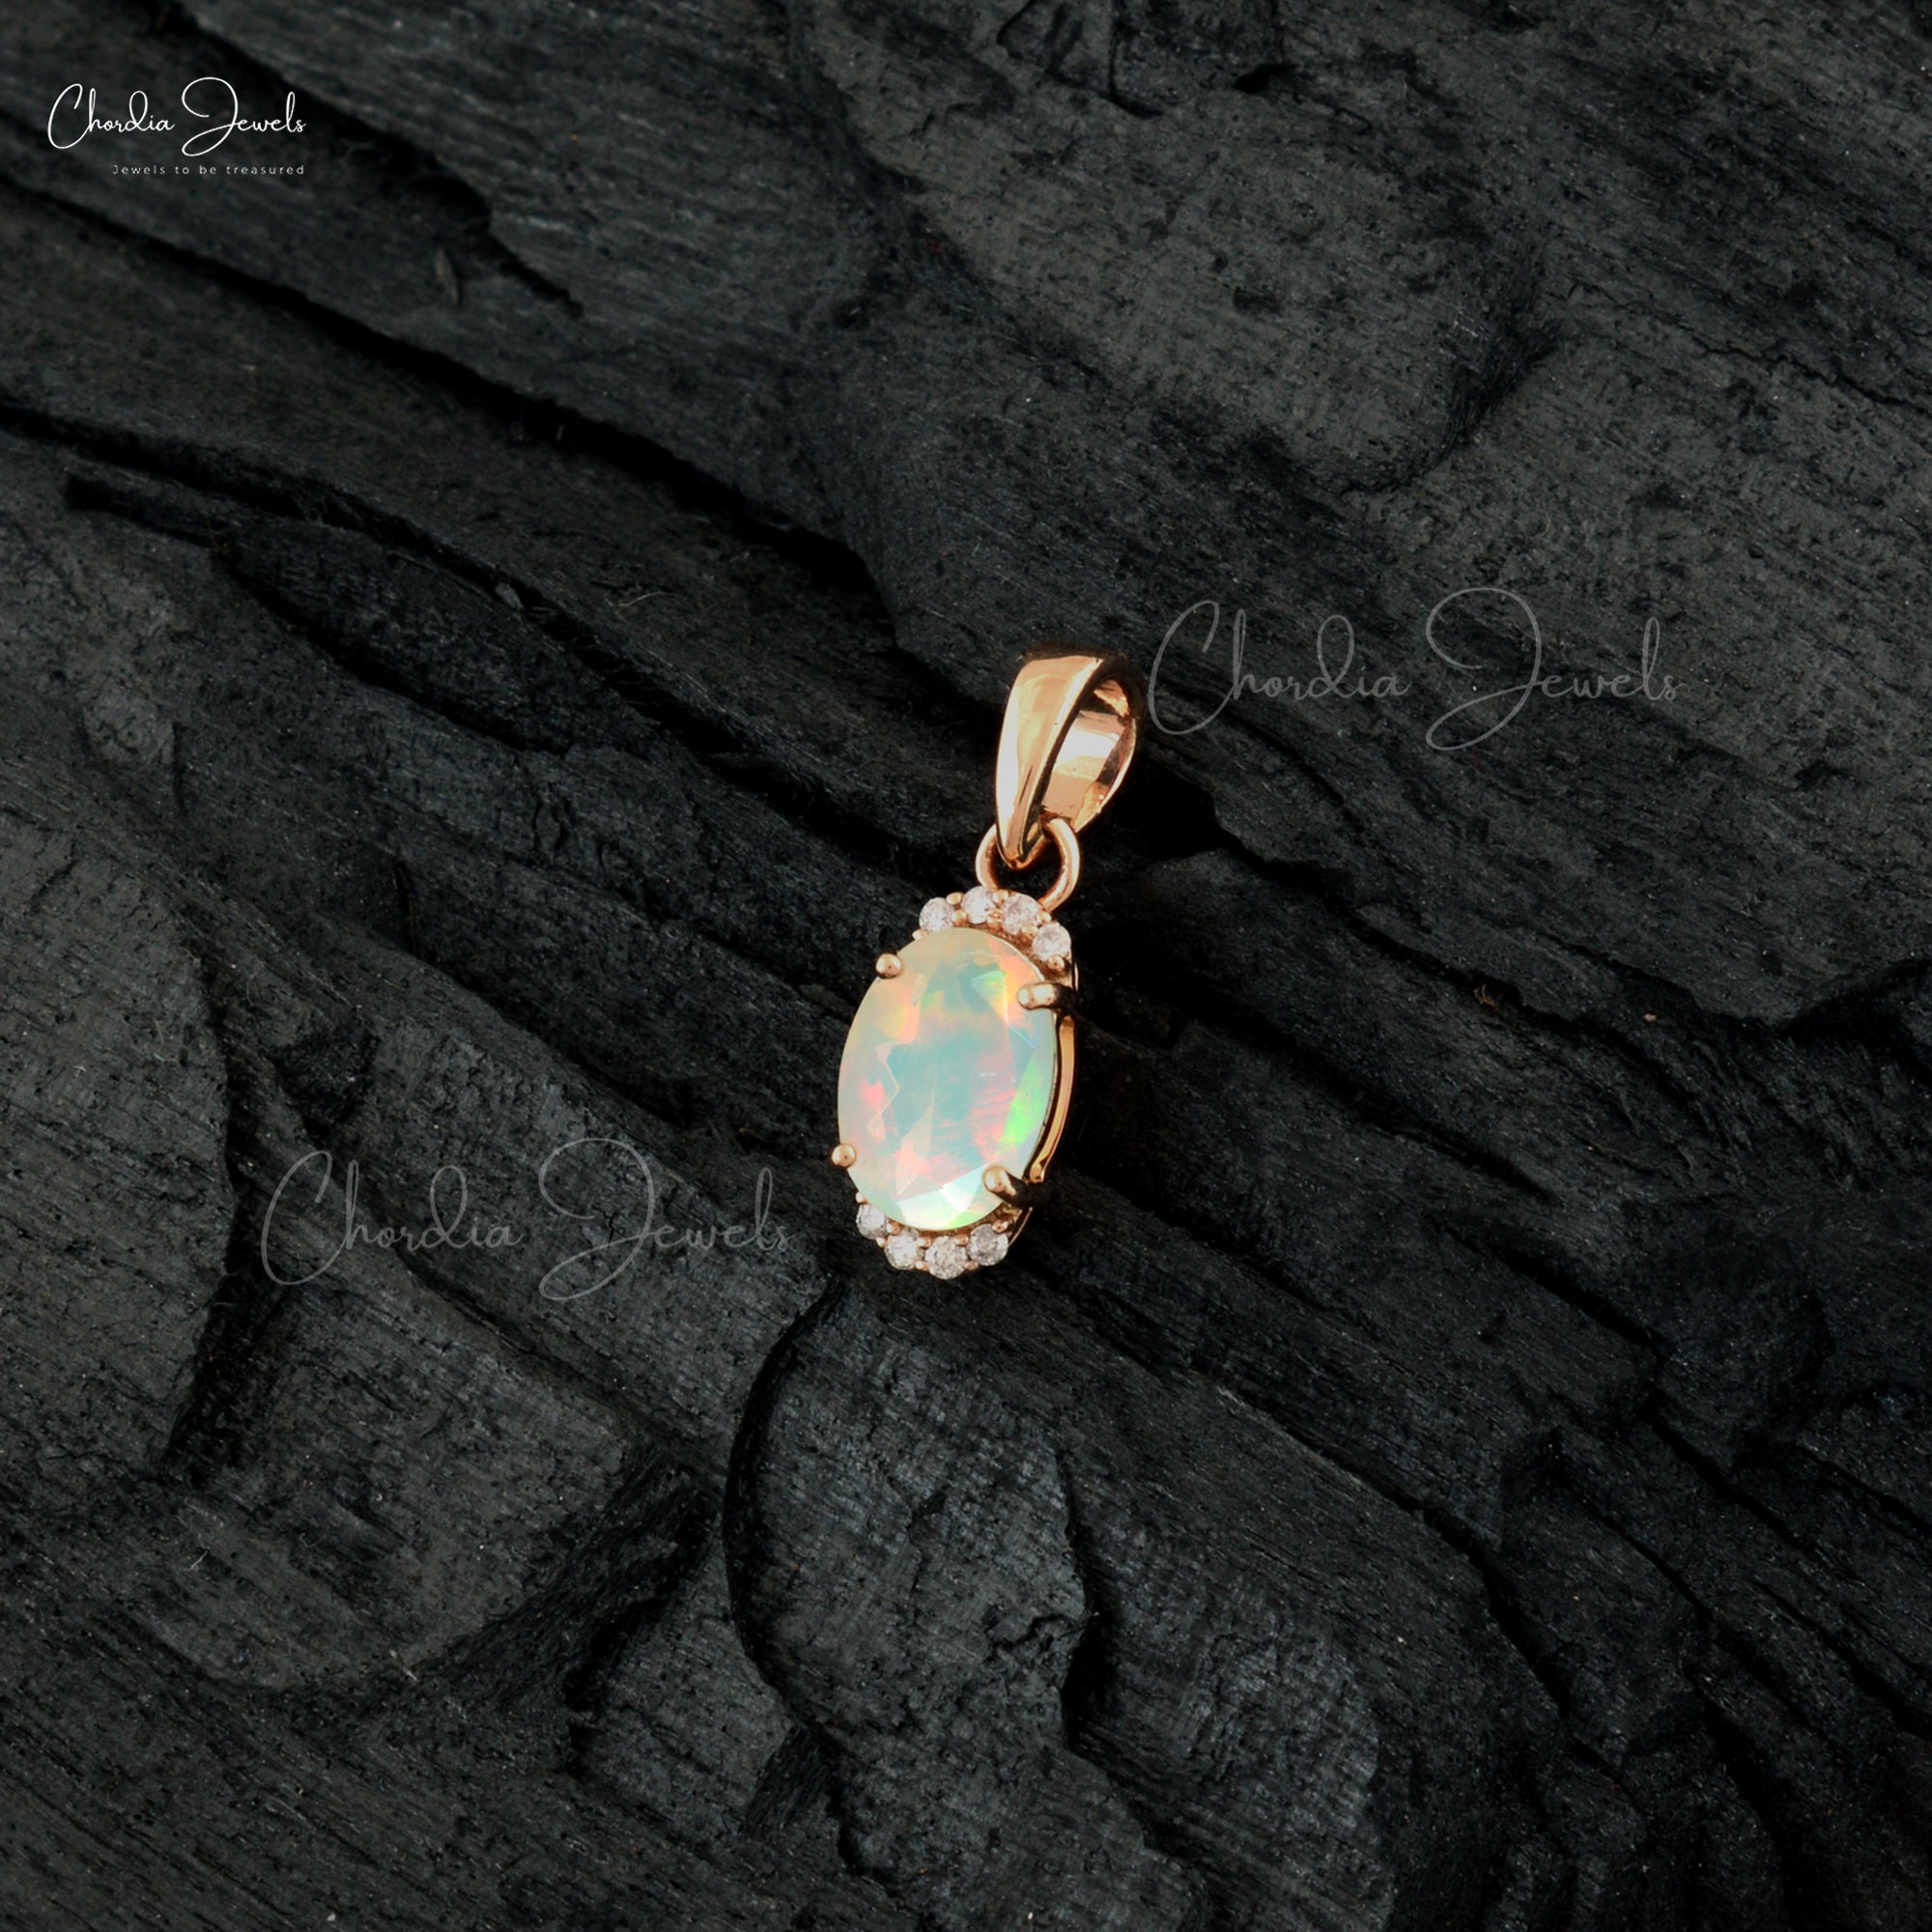 Buy White Opal Gold Necklace ,oval Fire Opal Necklace, Rhinestone & White Opal  Pendant, Bridal Opal Wedding Jewelry, Halo Bridesmaid Necklace Online in  India - Etsy